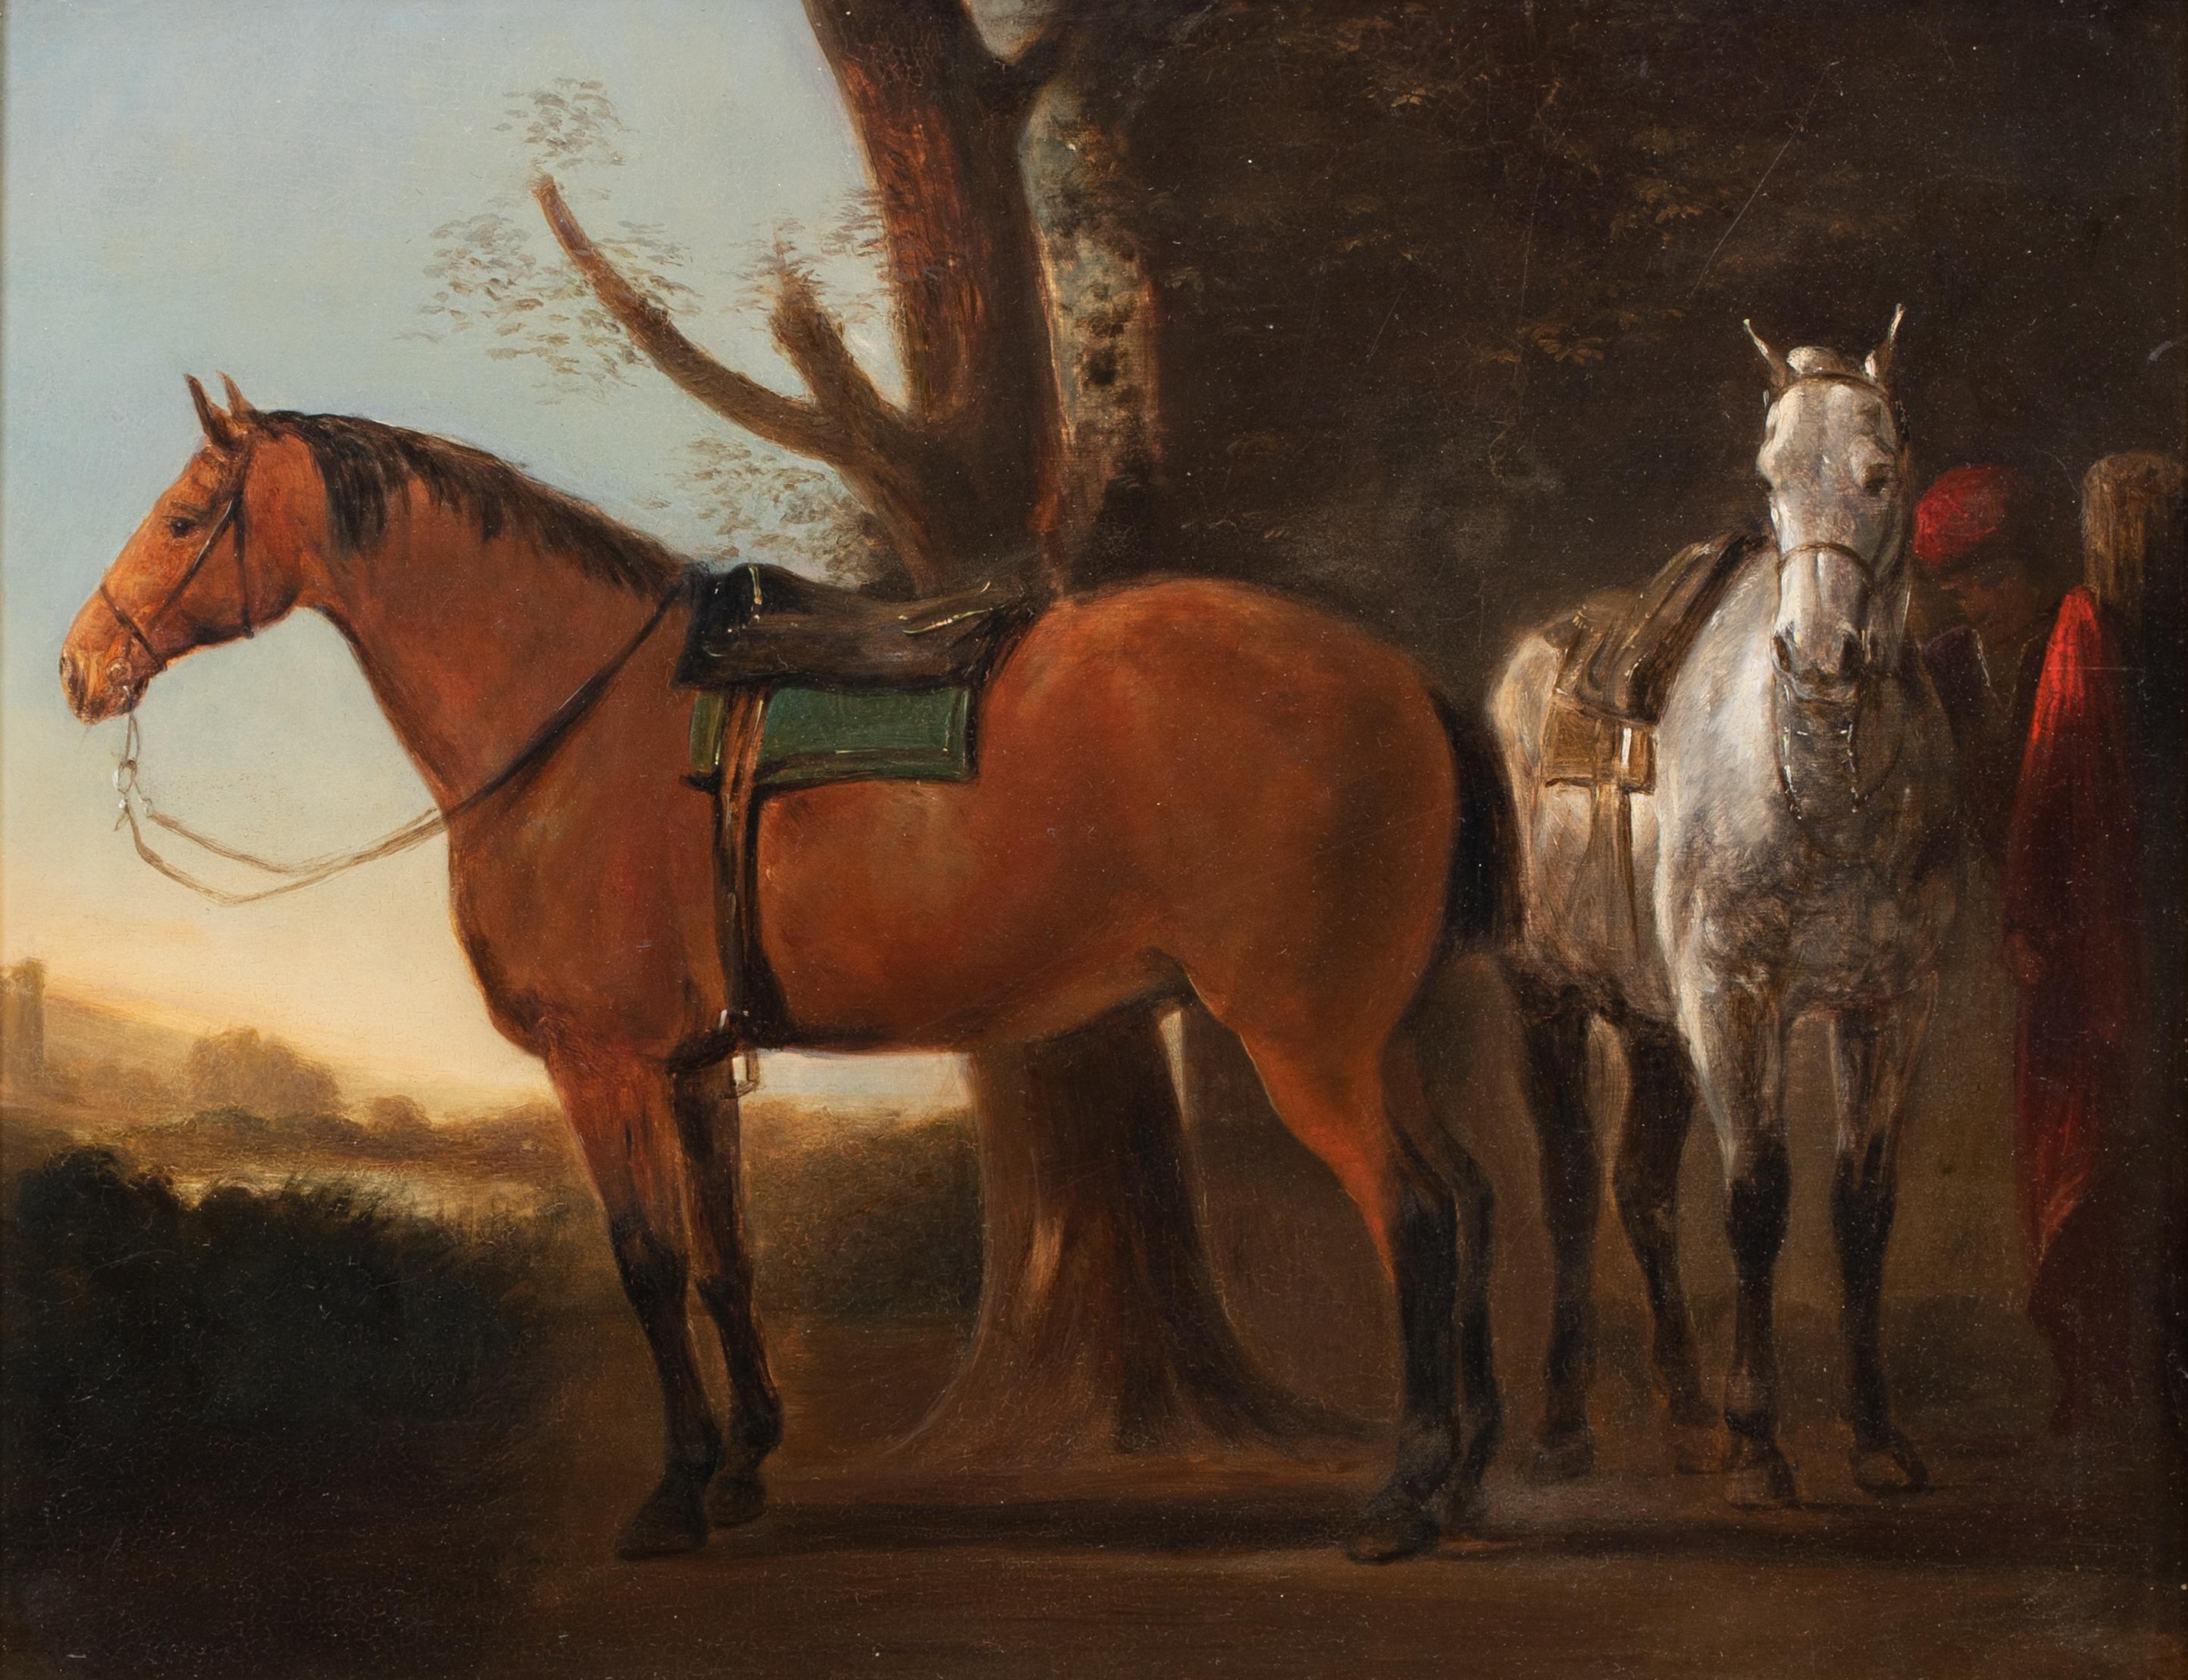 Study Of Horses. 19th Century

by William Henry WHEELWRIGHT (1820-1897) sales to £35,000

19th Century study of horses in a landscape by William Henry Wheelwright, oil on panel. Excellent quality and condition study undertaken by Wheelwright during